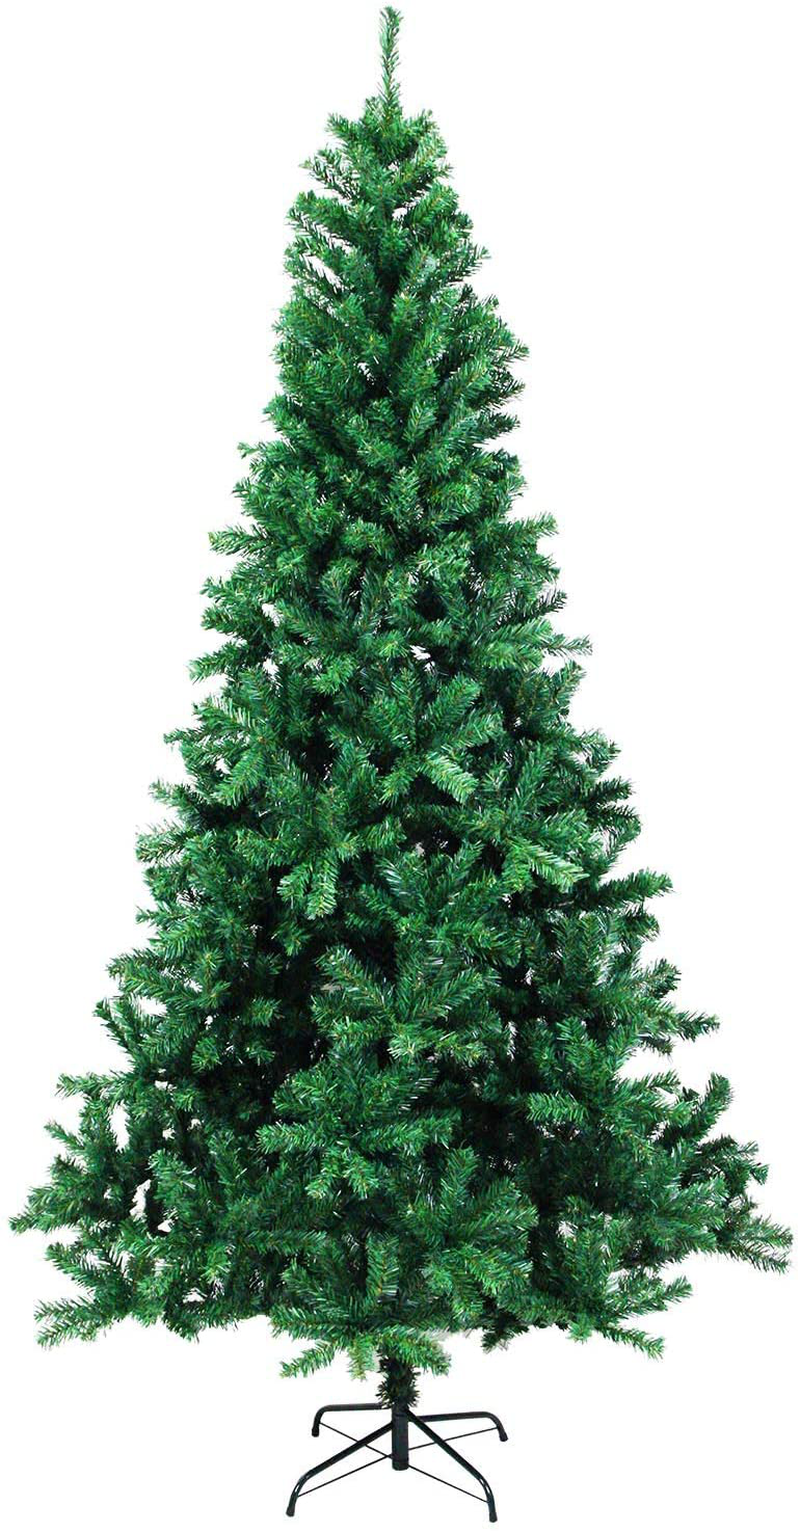 MTB 6 Feet Hinged Artificial Christmas Tree with Metal Stand, 1000 Tips Recycled PVC Plastic, Green